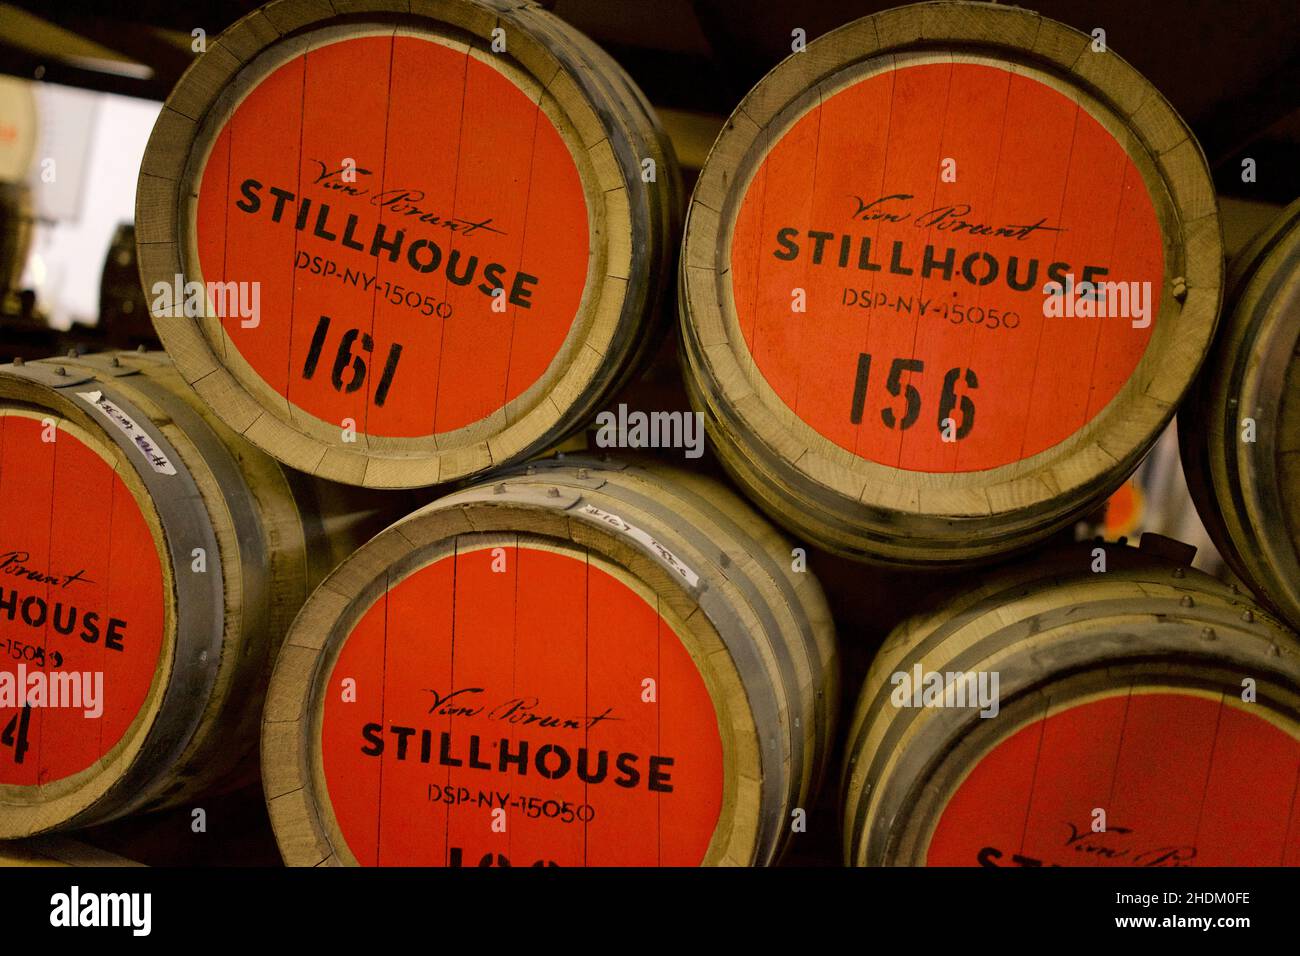 Wooden barrels at Van Brunt Stillhouse is a New York State Farm Distillery in the heart of Red Hook Brooklyn, New York City, NY, USA Stock Photo